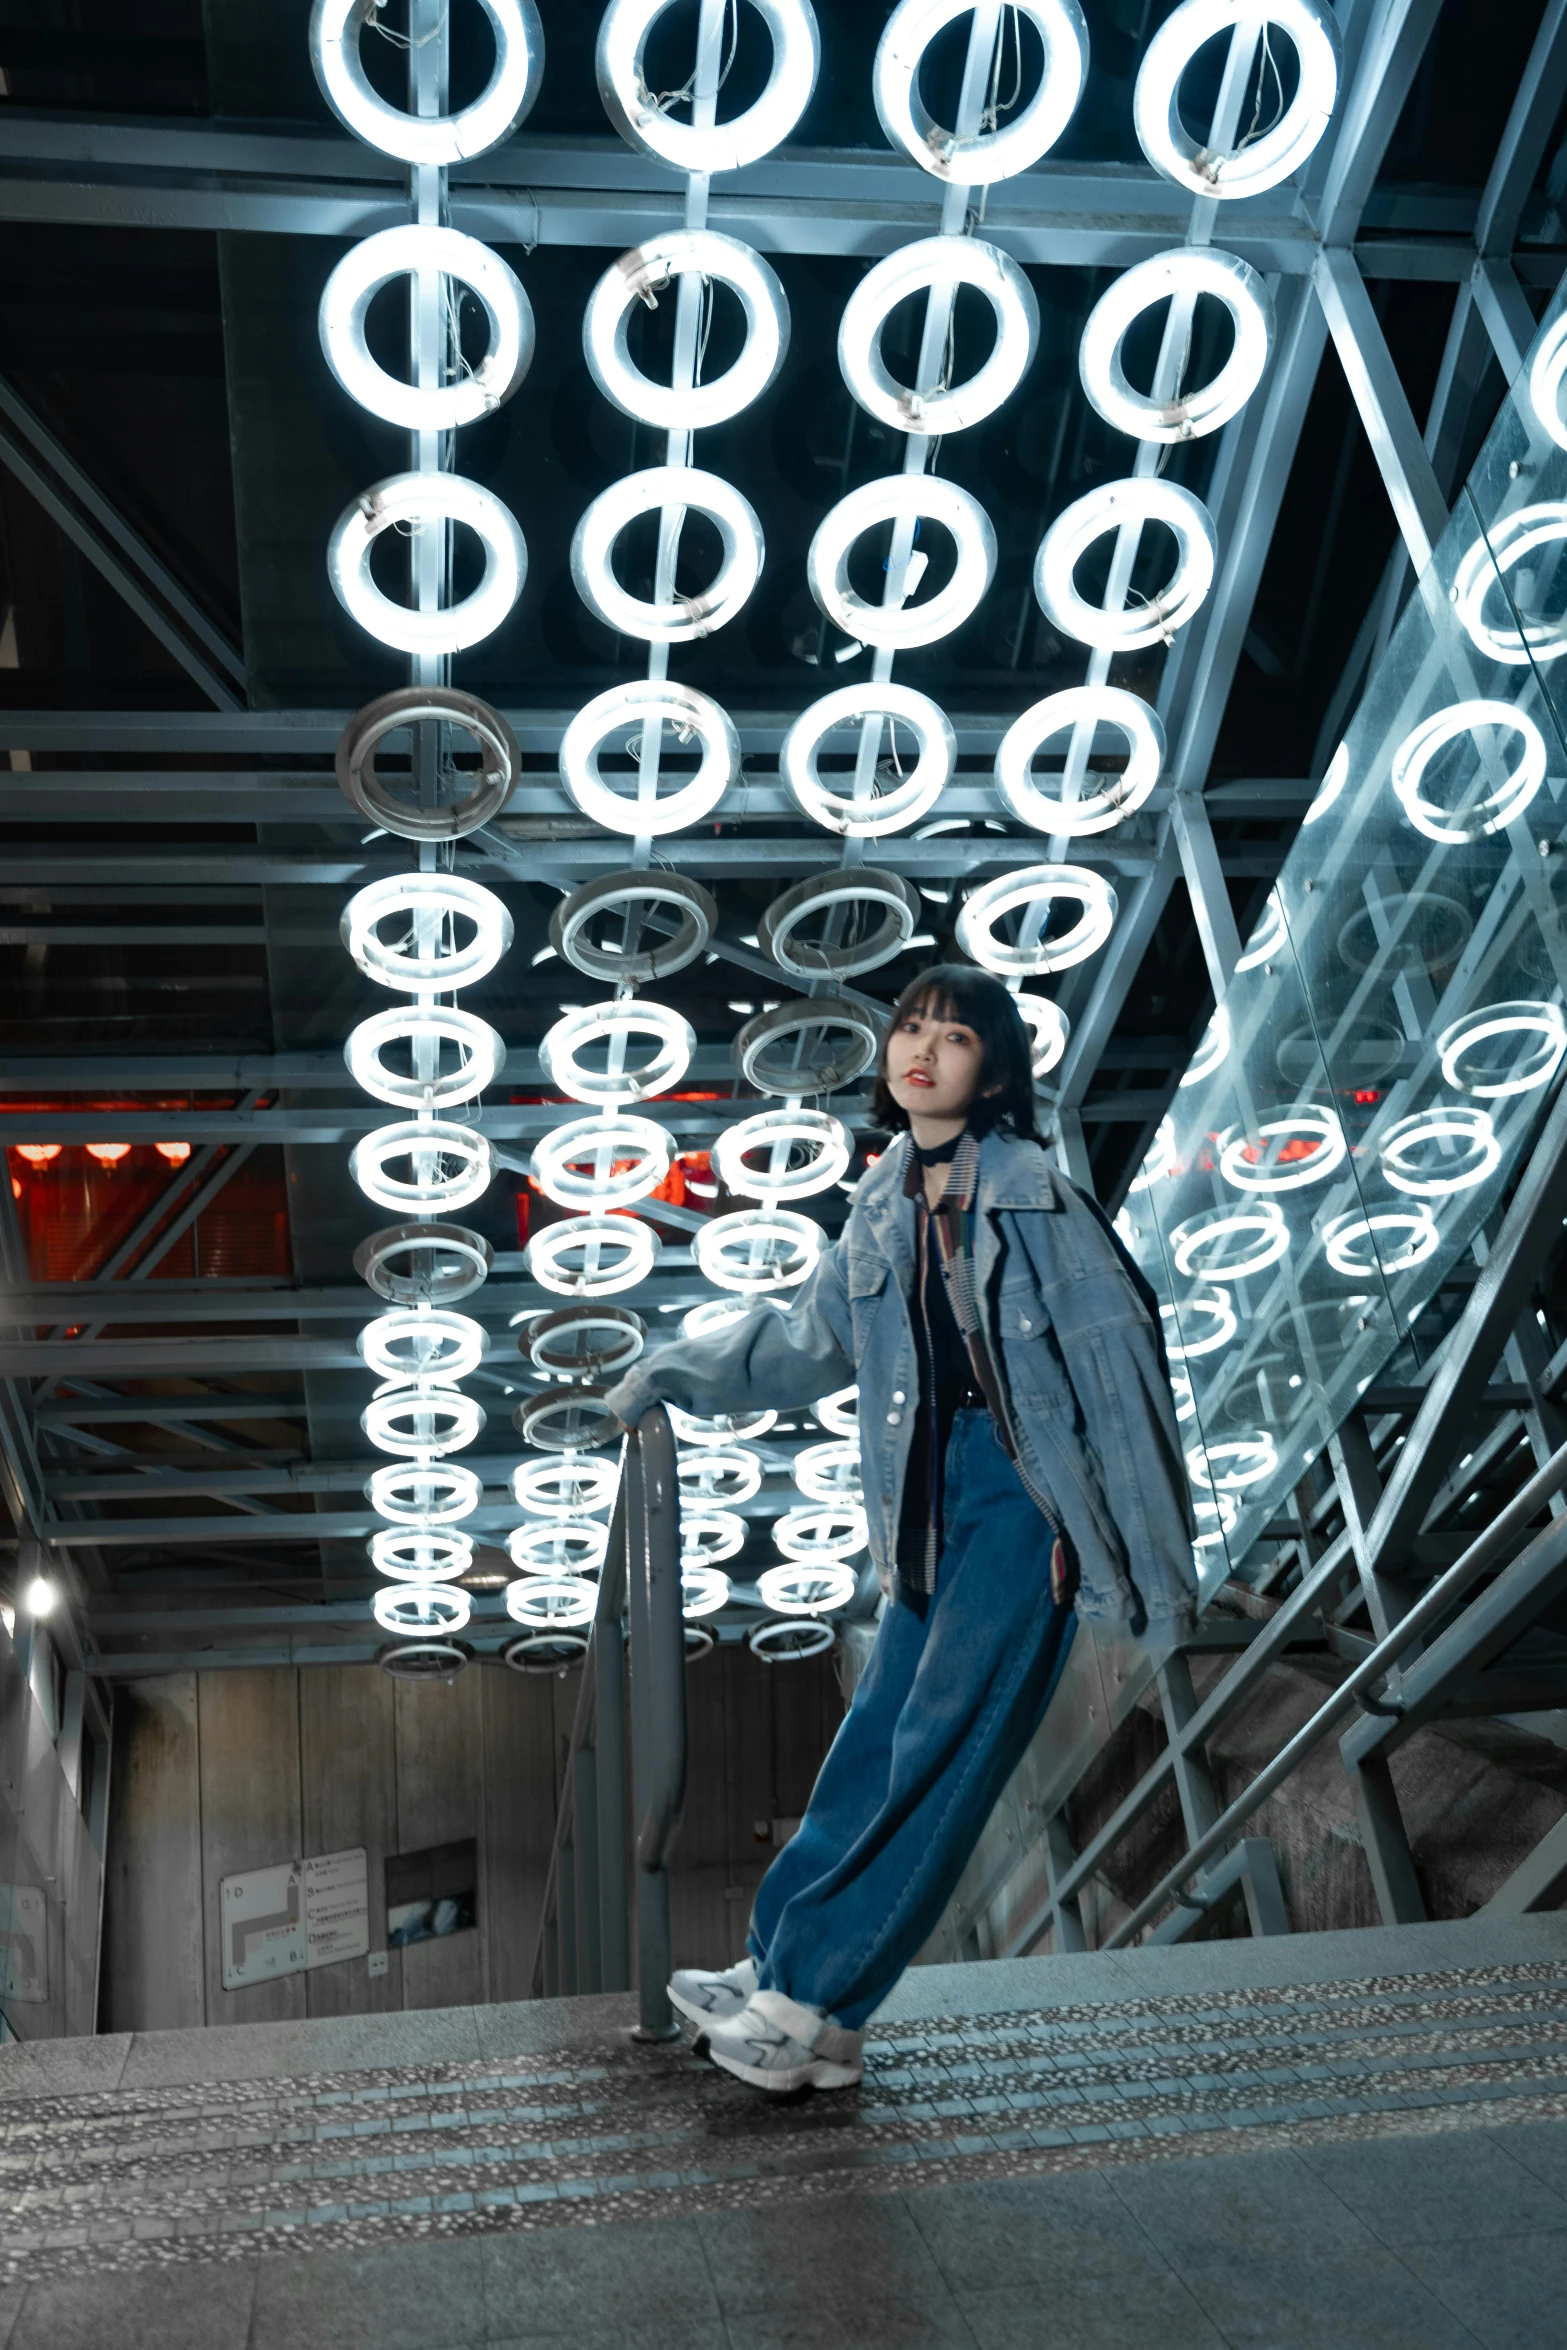 a man standing in a building with lights on the ceiling